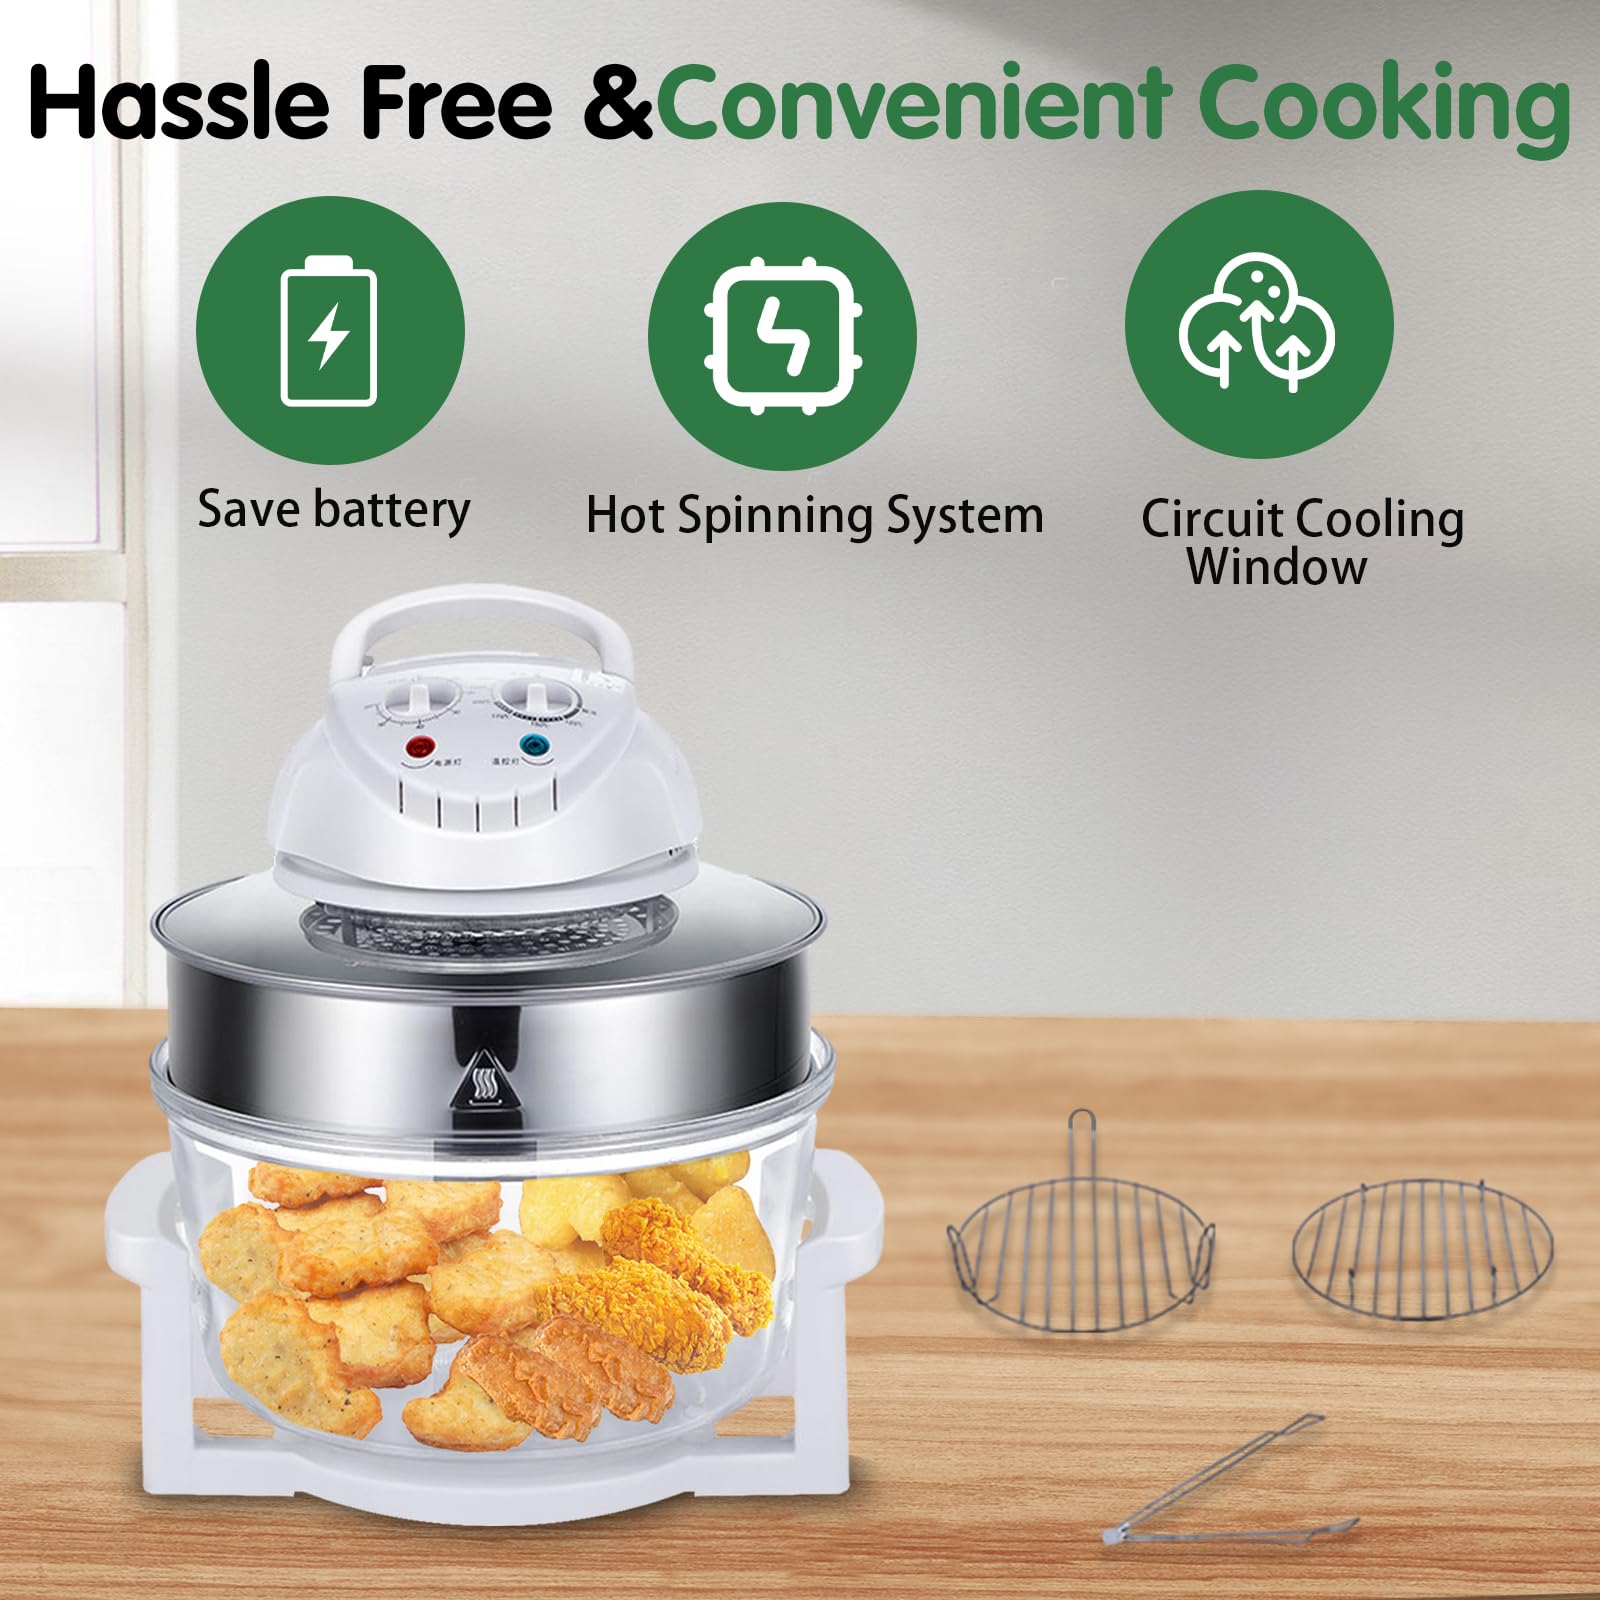 17L Air Fryer By Gagalayong, Turbo Portable Air Fryer, Infrared Convection, Electric Large Halogen Oven Countertop,Cooking 360°Heating Prepare Quick Healthy Meals, French Fries Oven Roaster